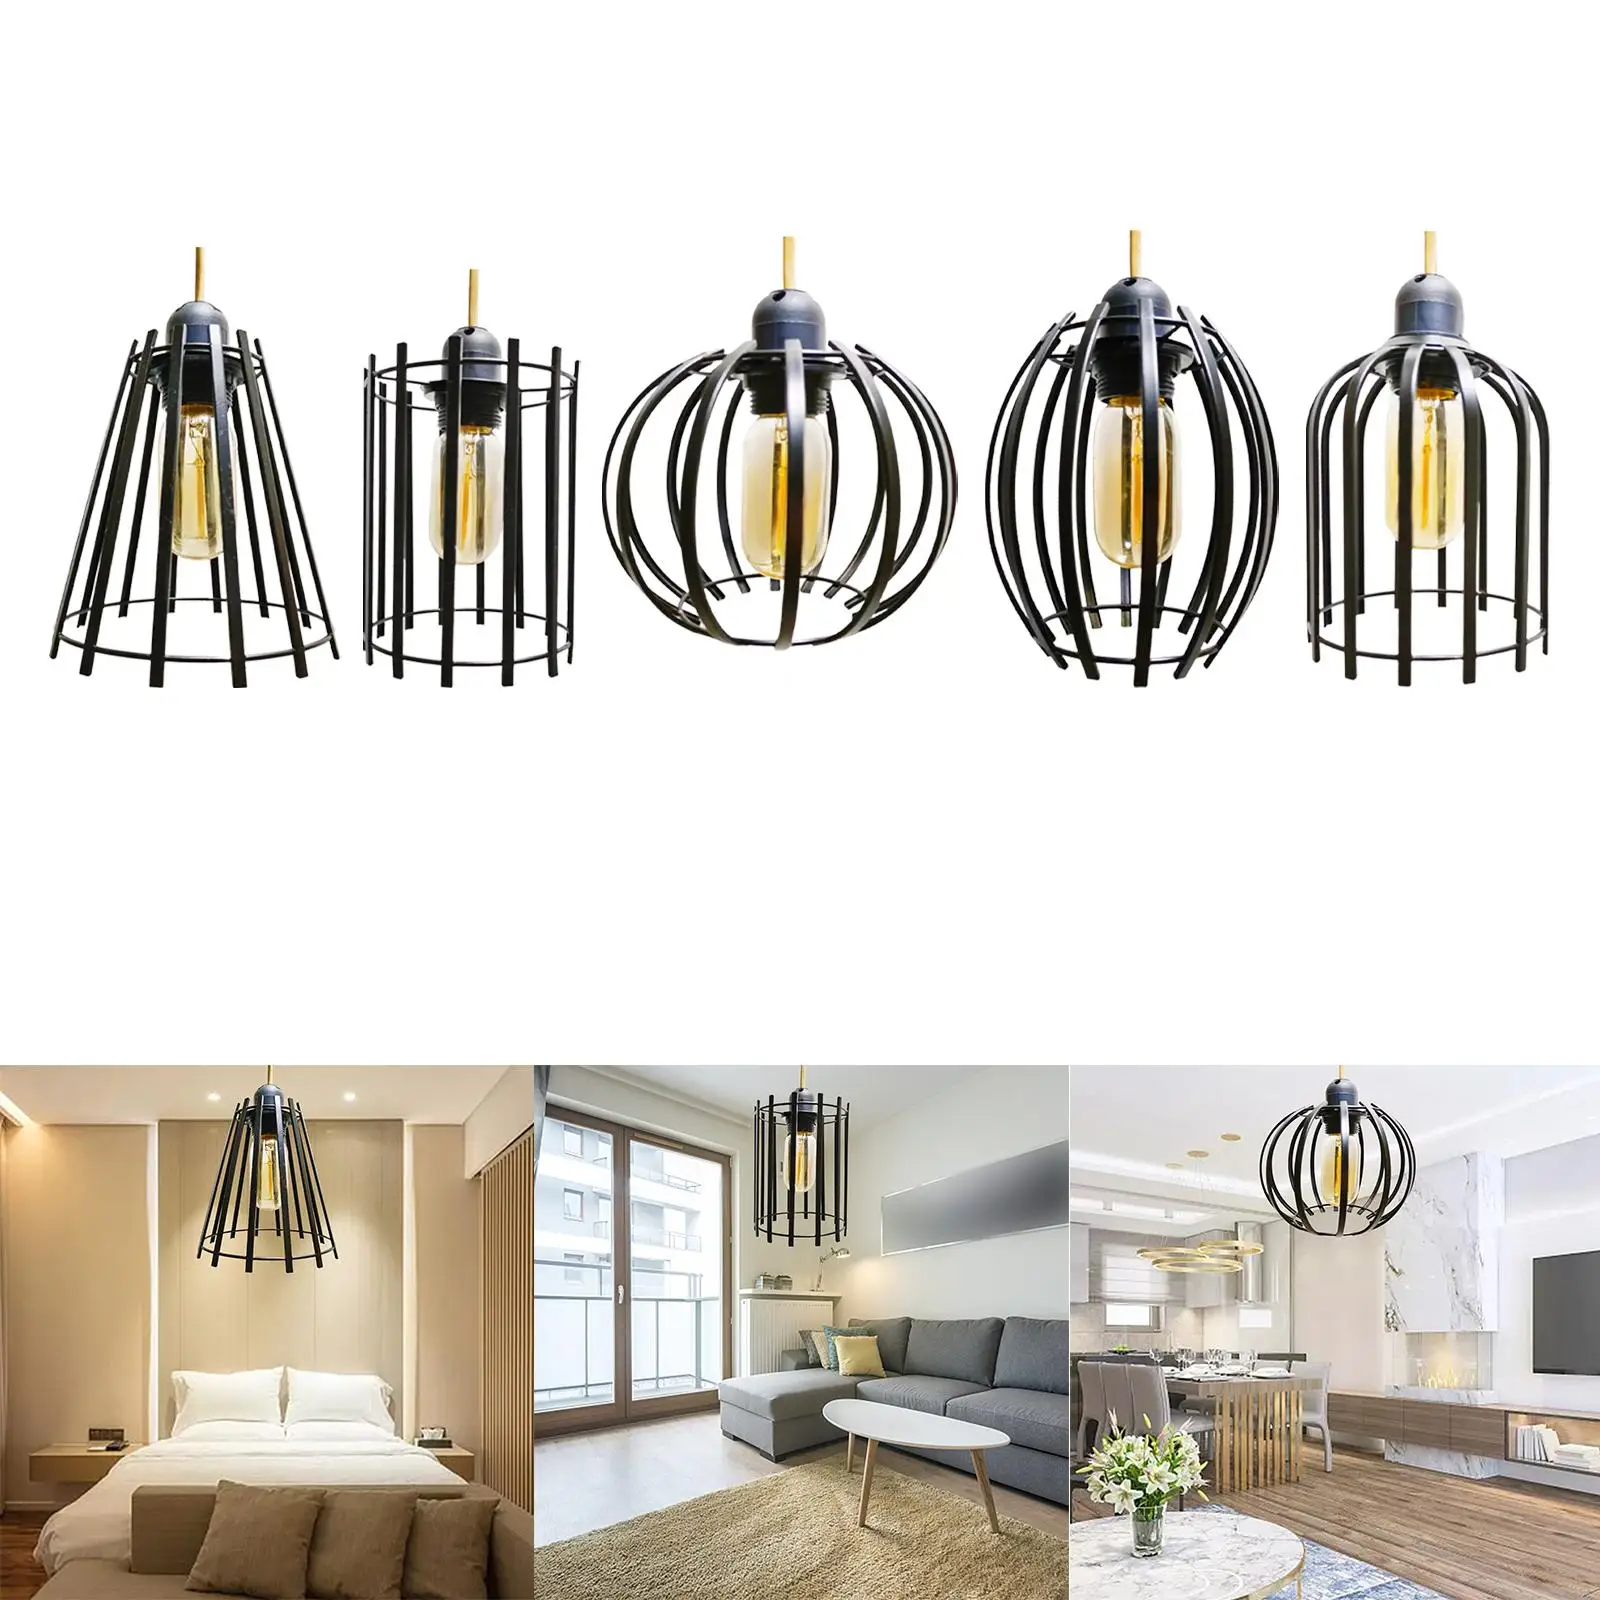 Iron Pendant Lamp Shade Simple Pendant Light Shade Light Bulb Cage Lamp Cover for Restaurant Kitchen Dining Room Hotel Bedroom